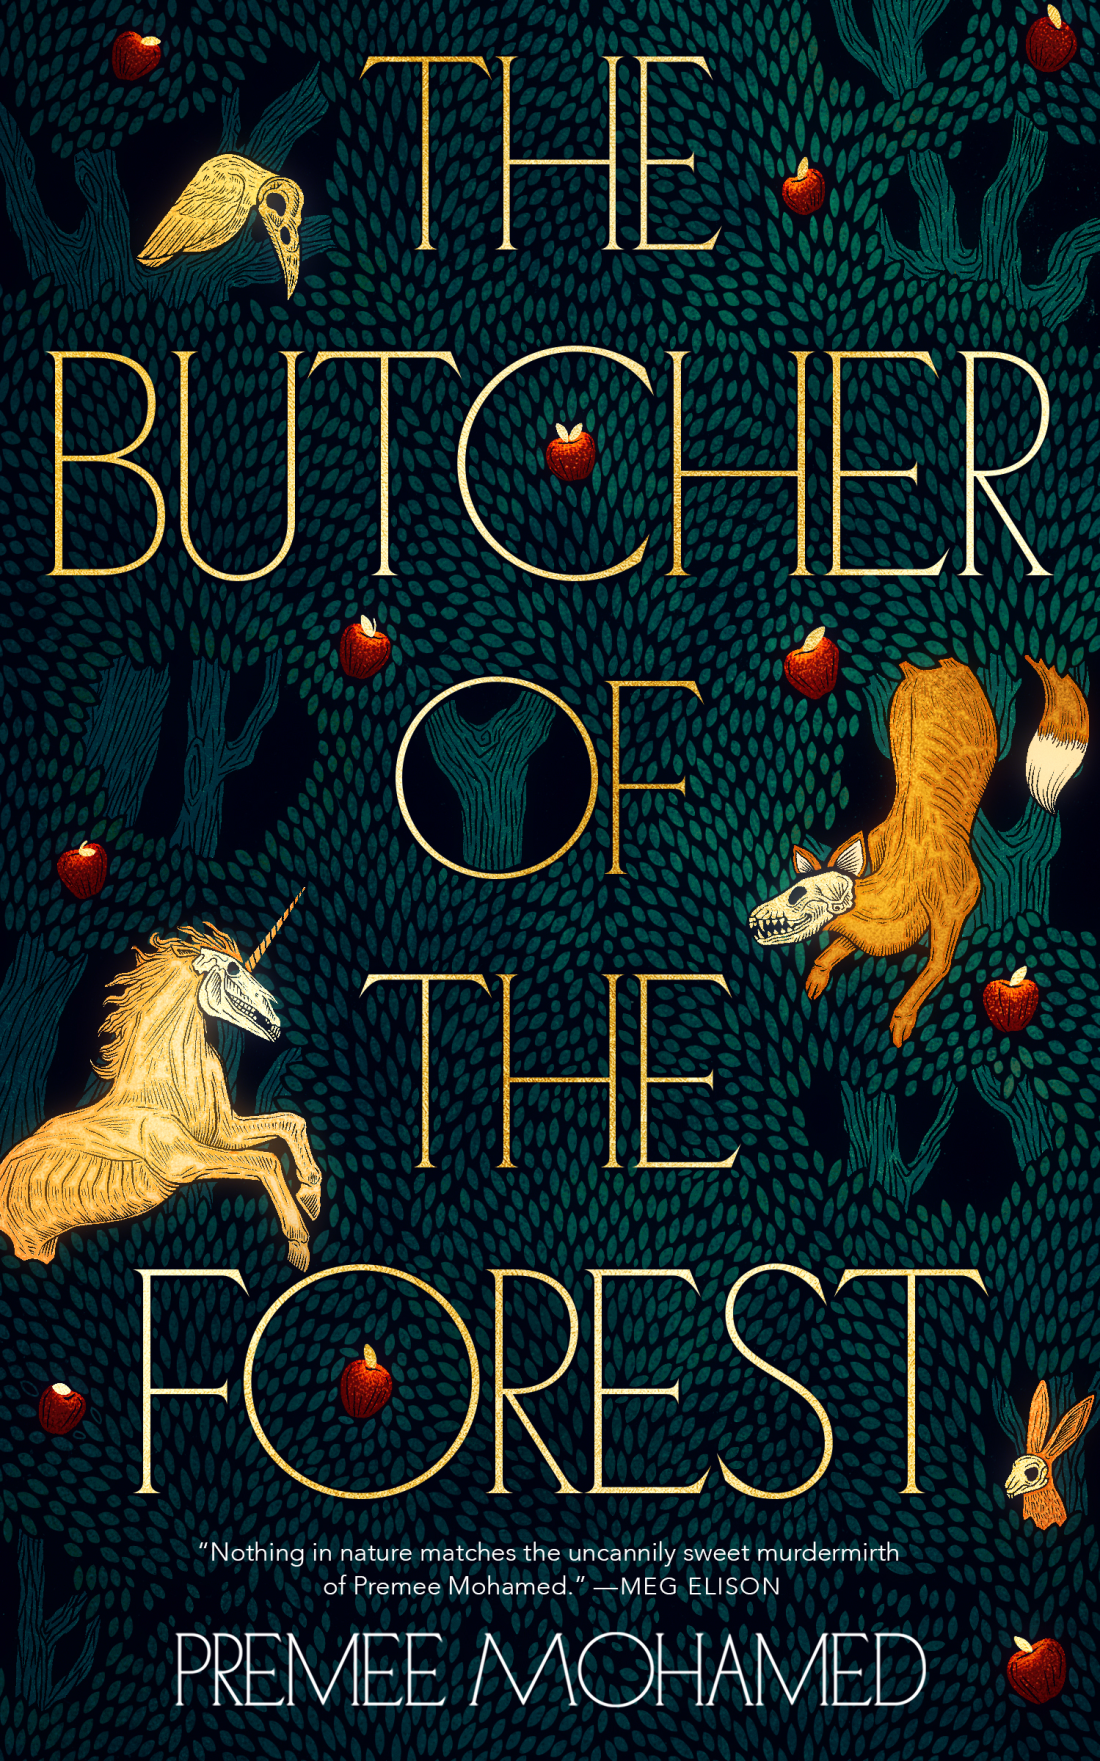 Butcher of the Forest